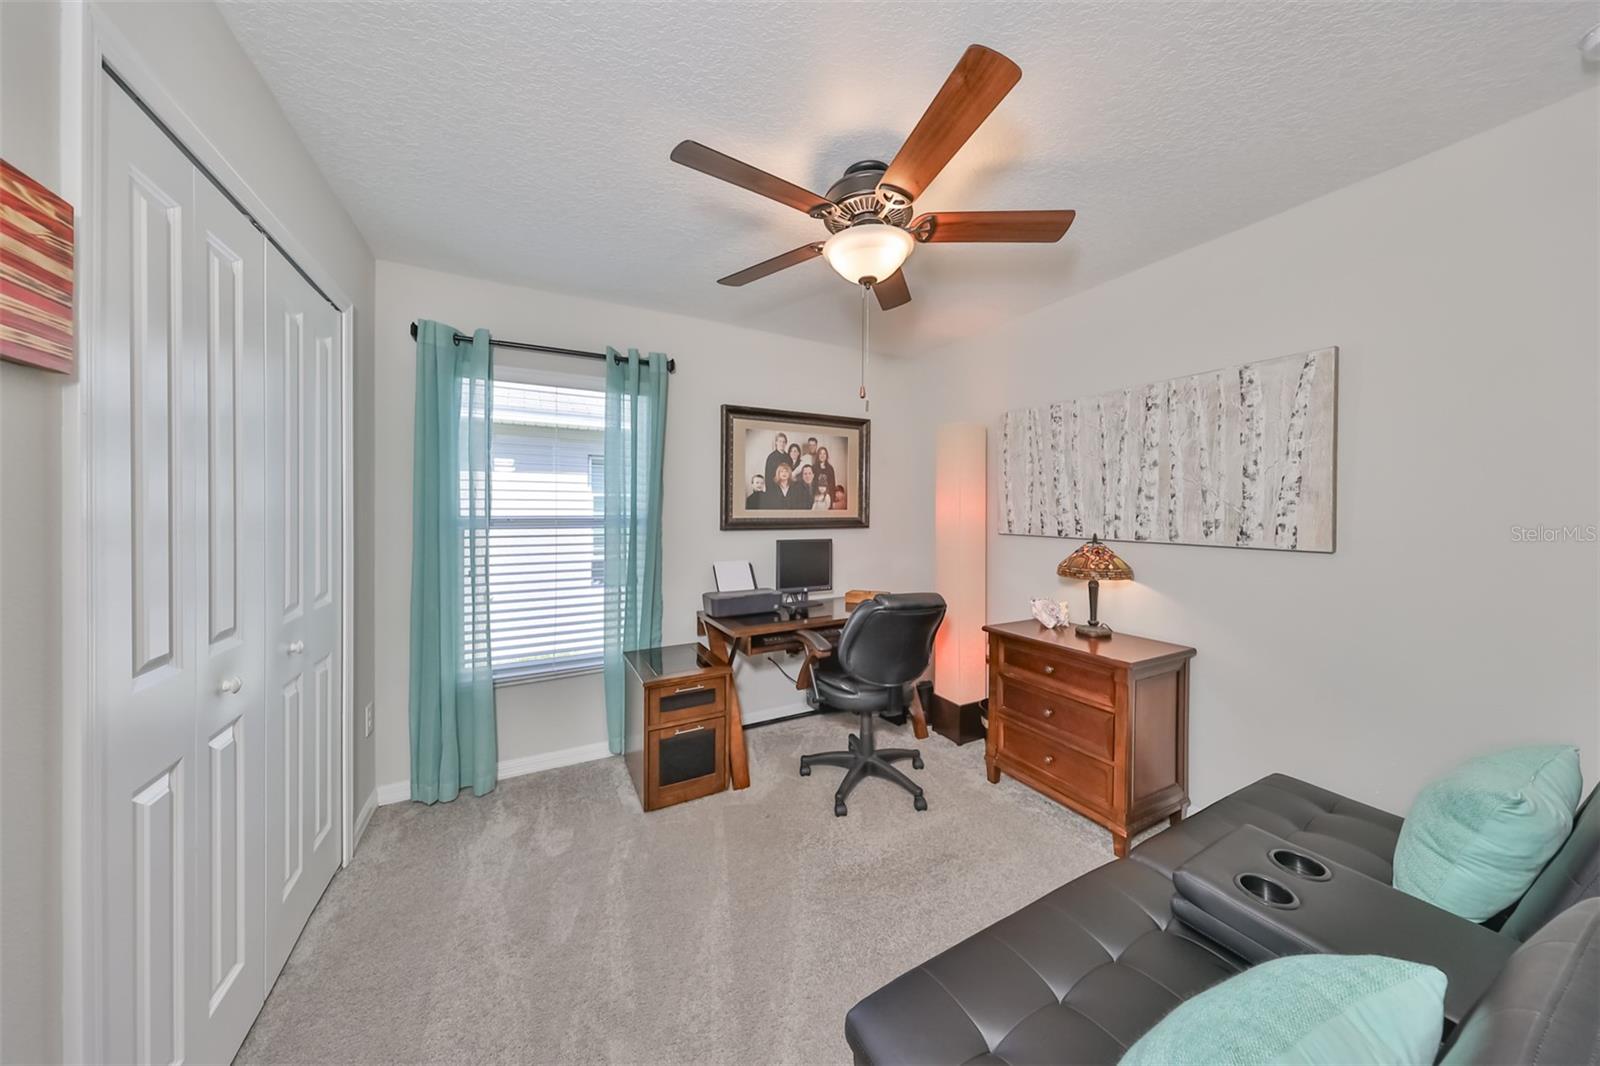 Fourth bedroom is bright and spacious, also with a large wall closet.